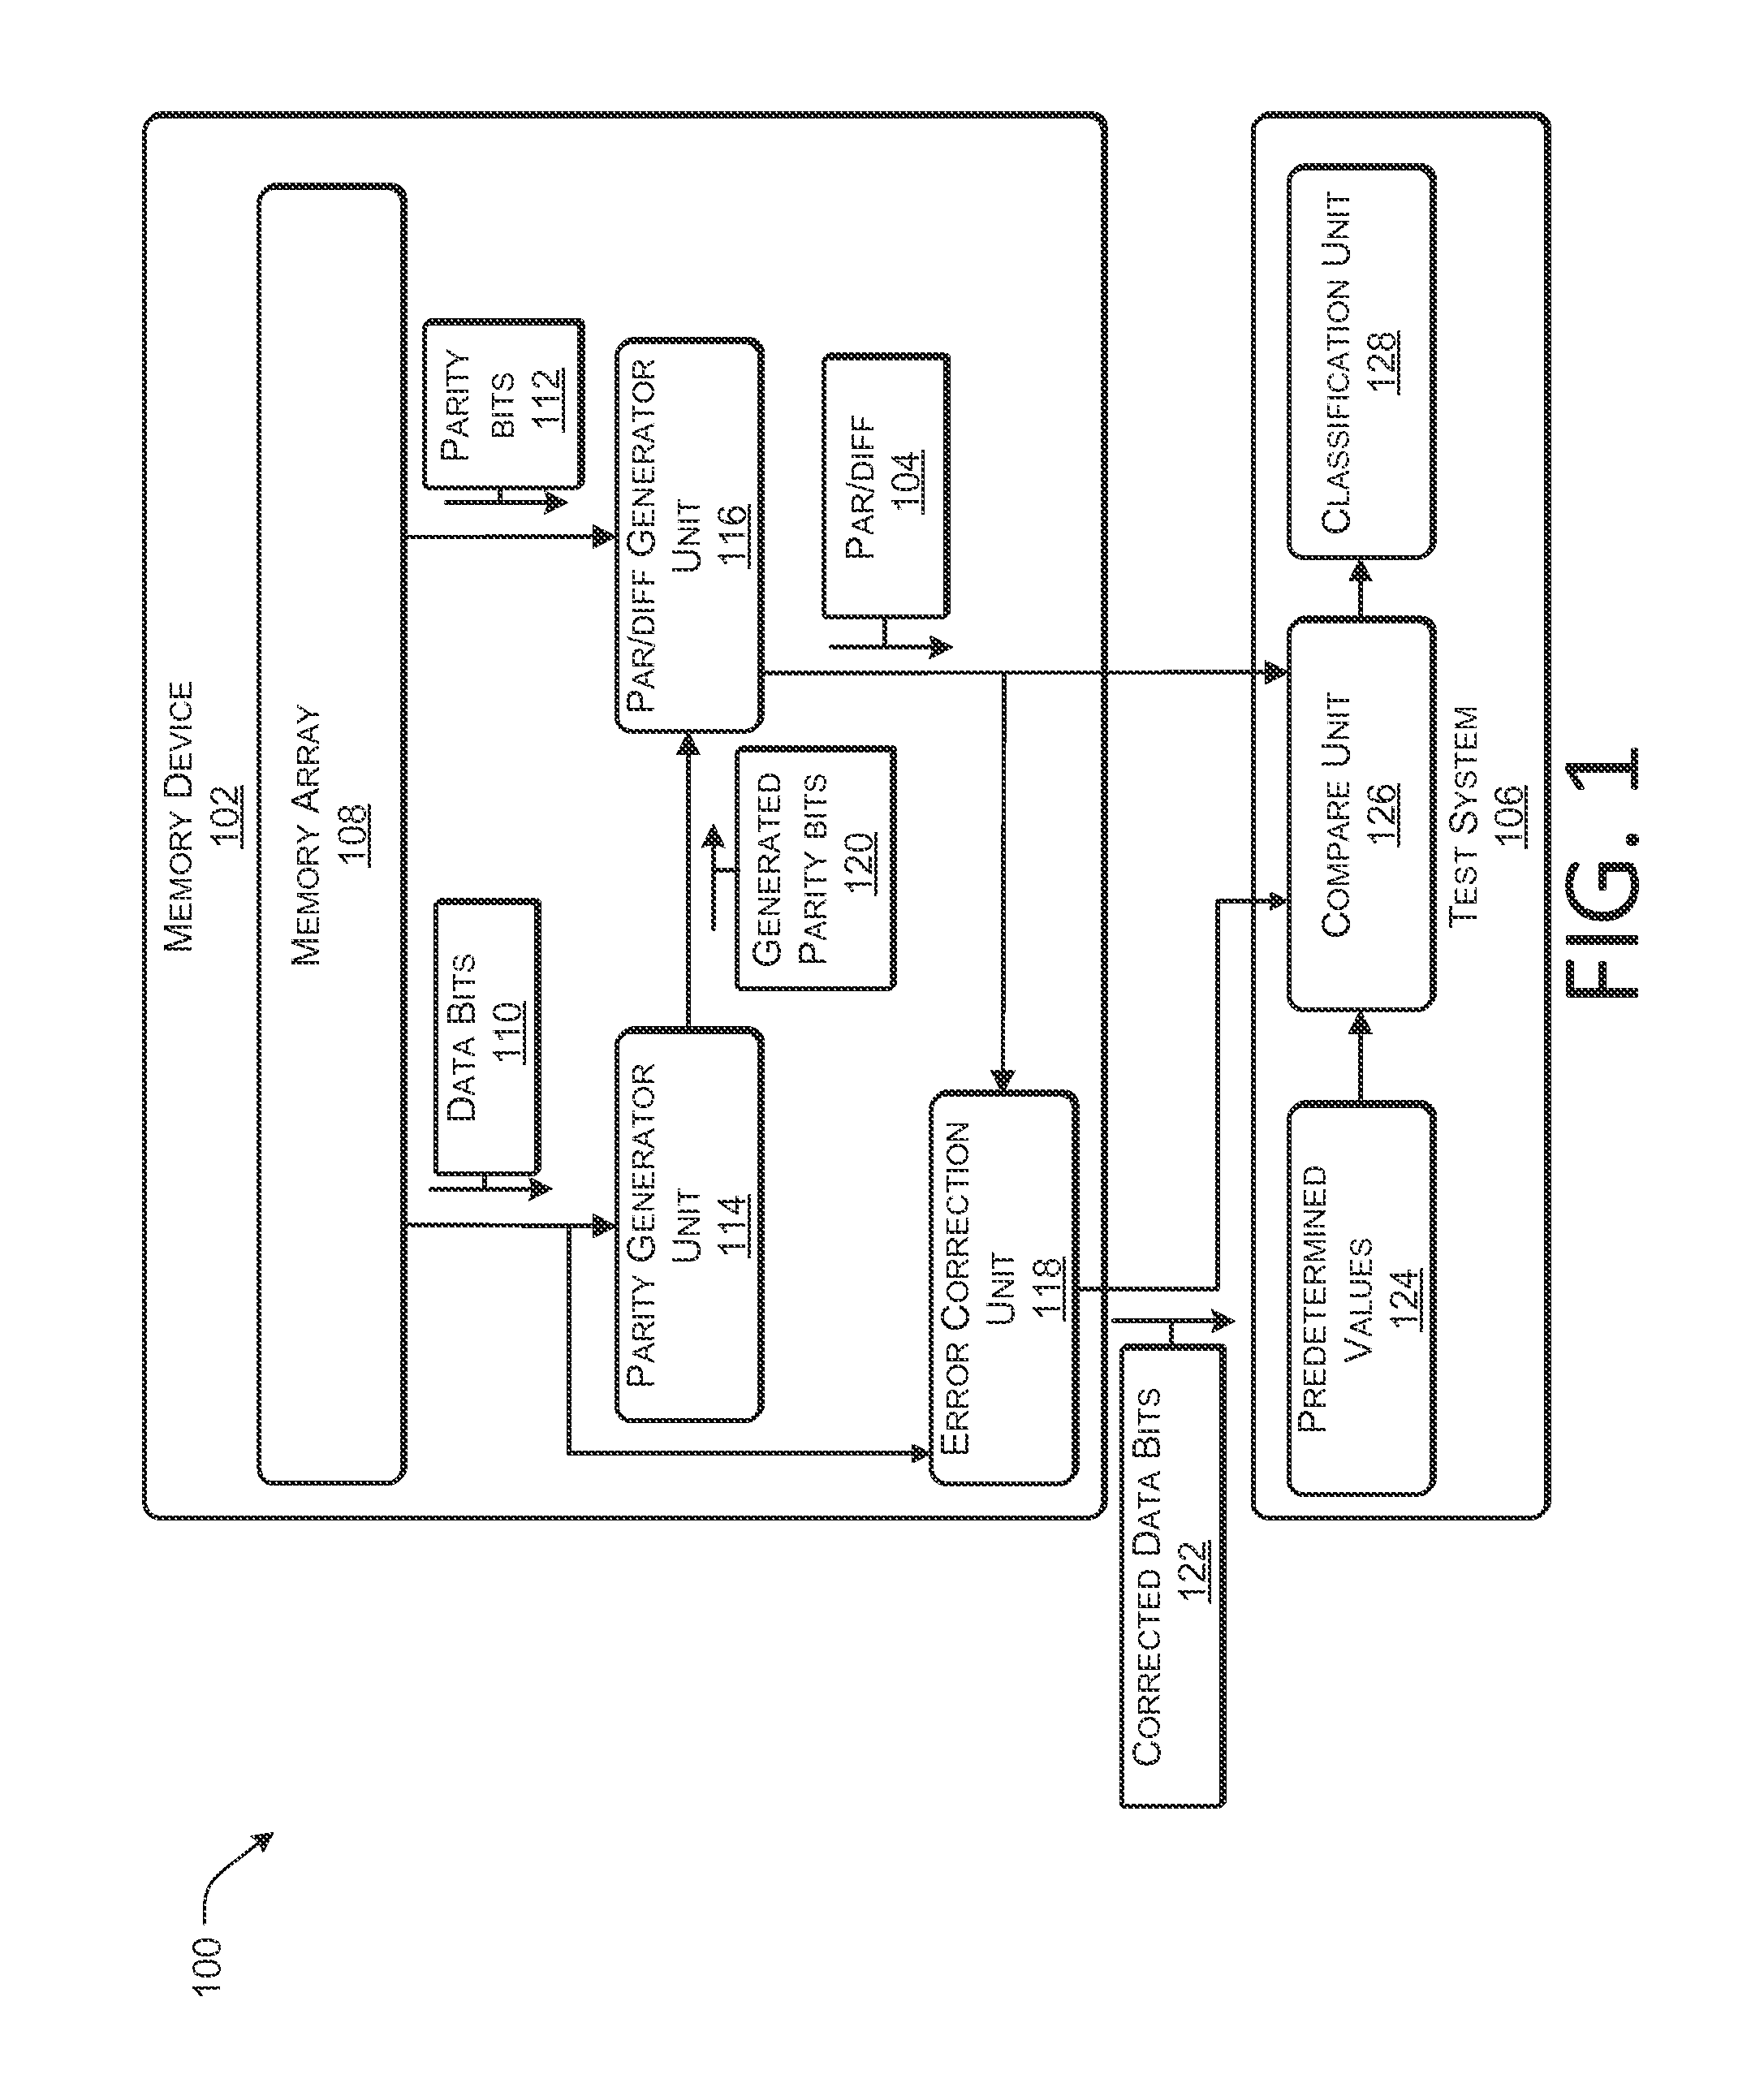 Memory device with reduced test time